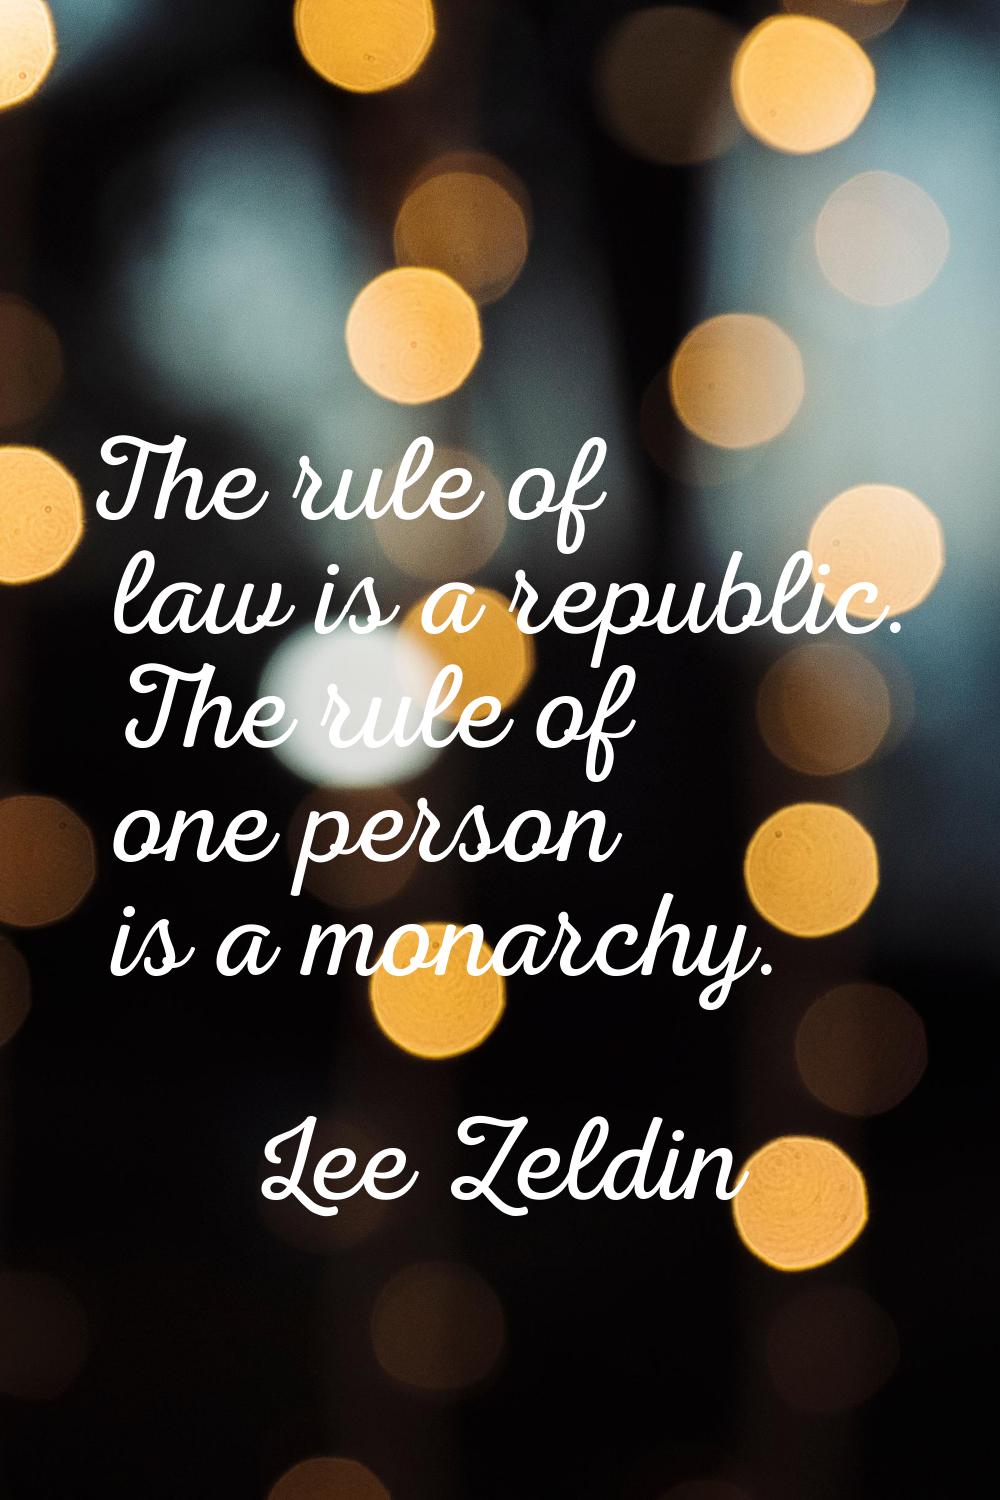 The rule of law is a republic. The rule of one person is a monarchy.